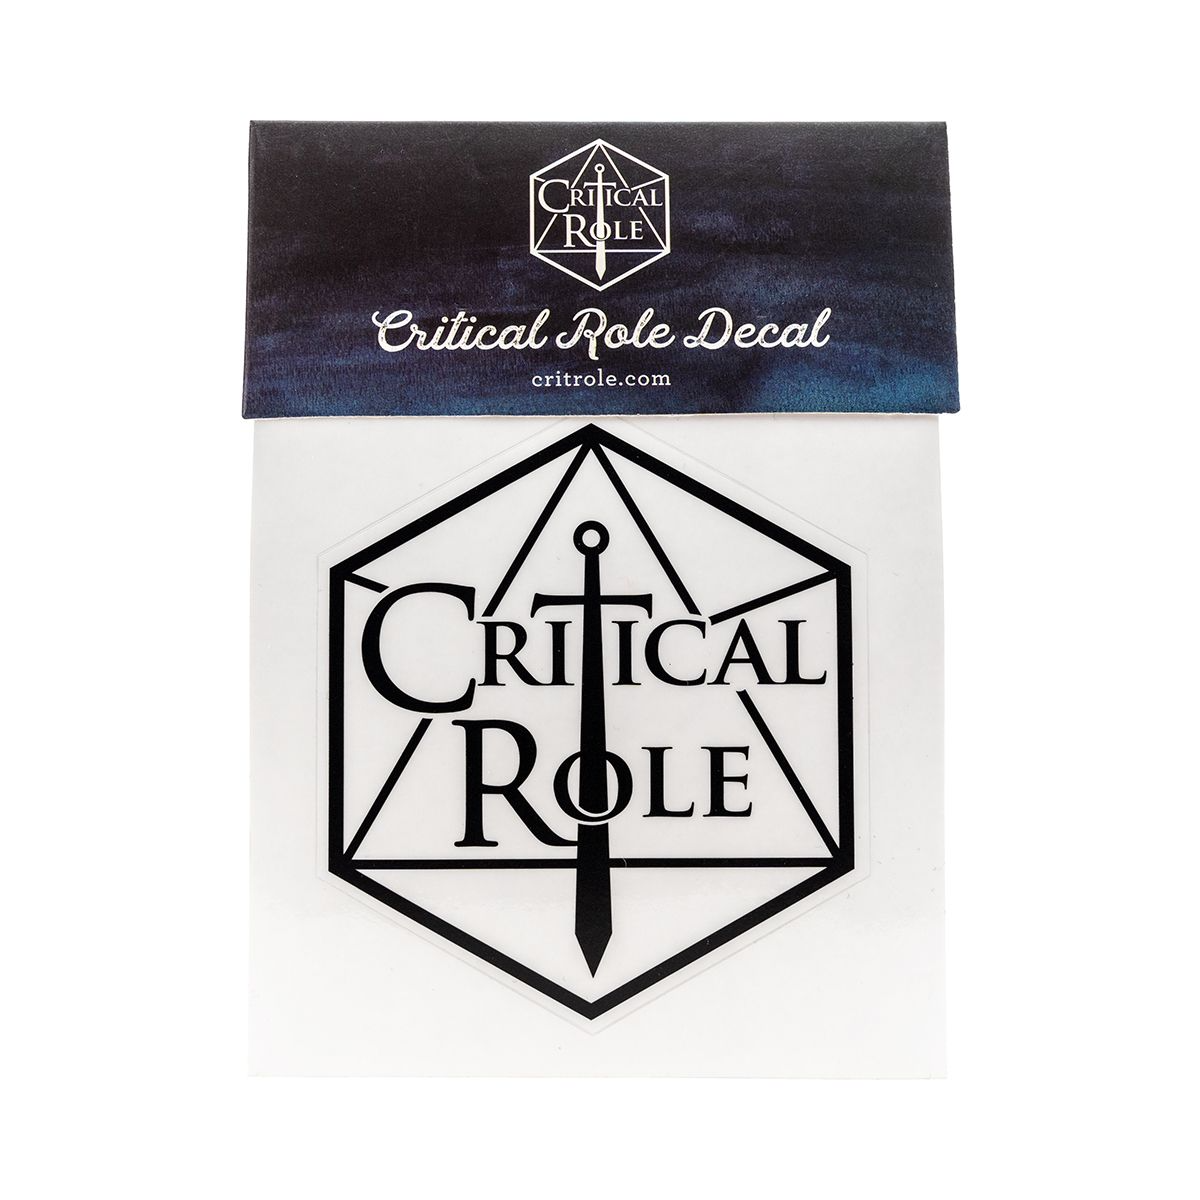 CRITICAL ROLE DECAL